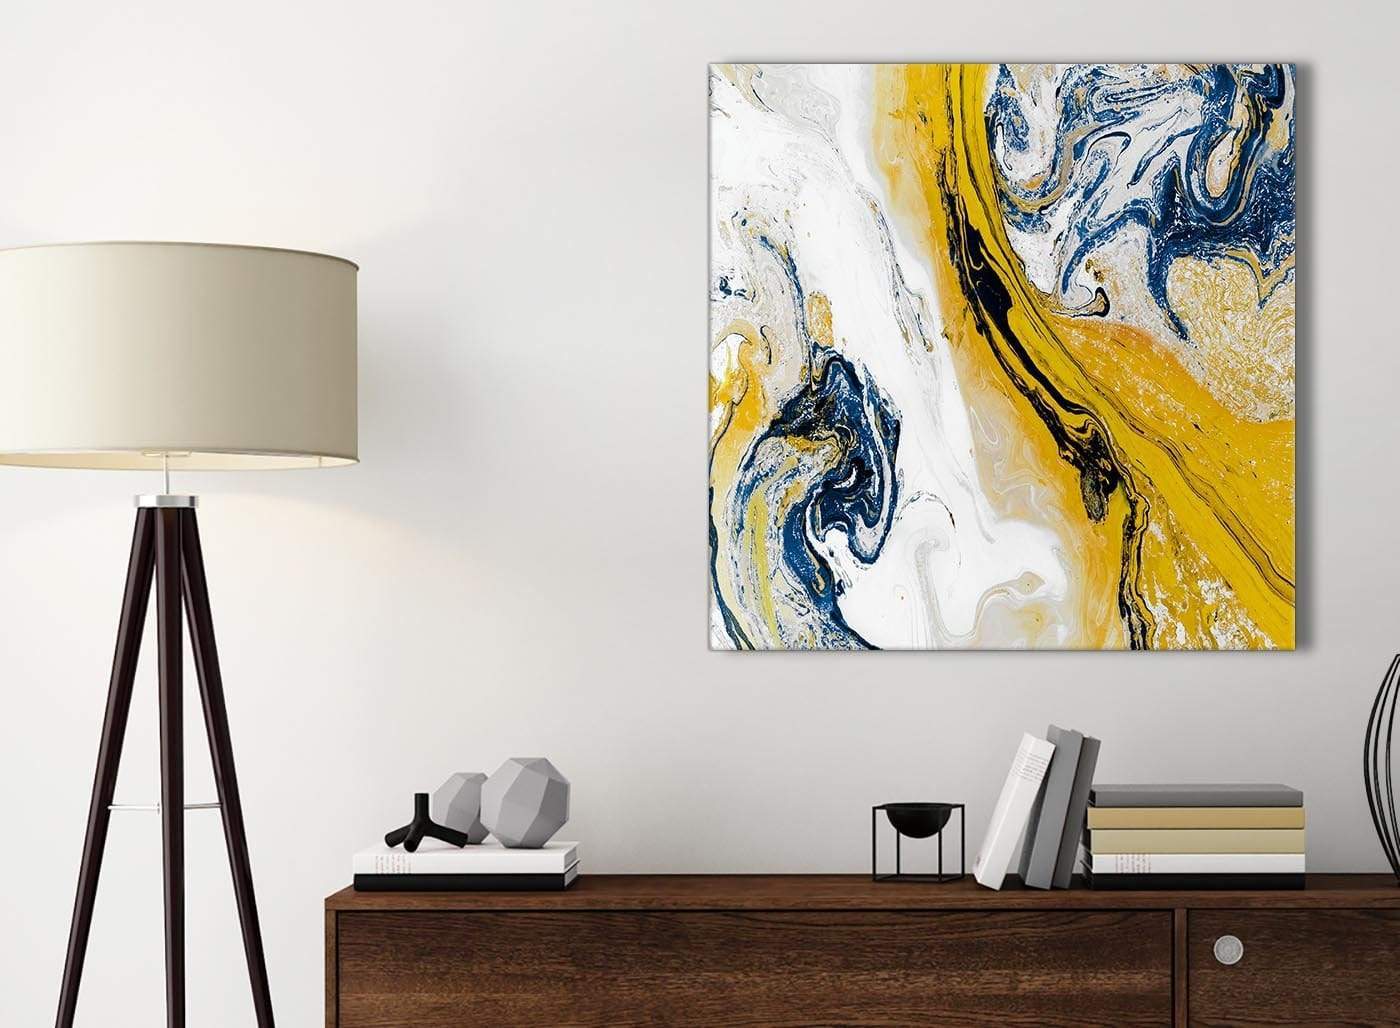 Mustard Yellow and Blue Swirl Living Room Canvas Pictures Accessories ...